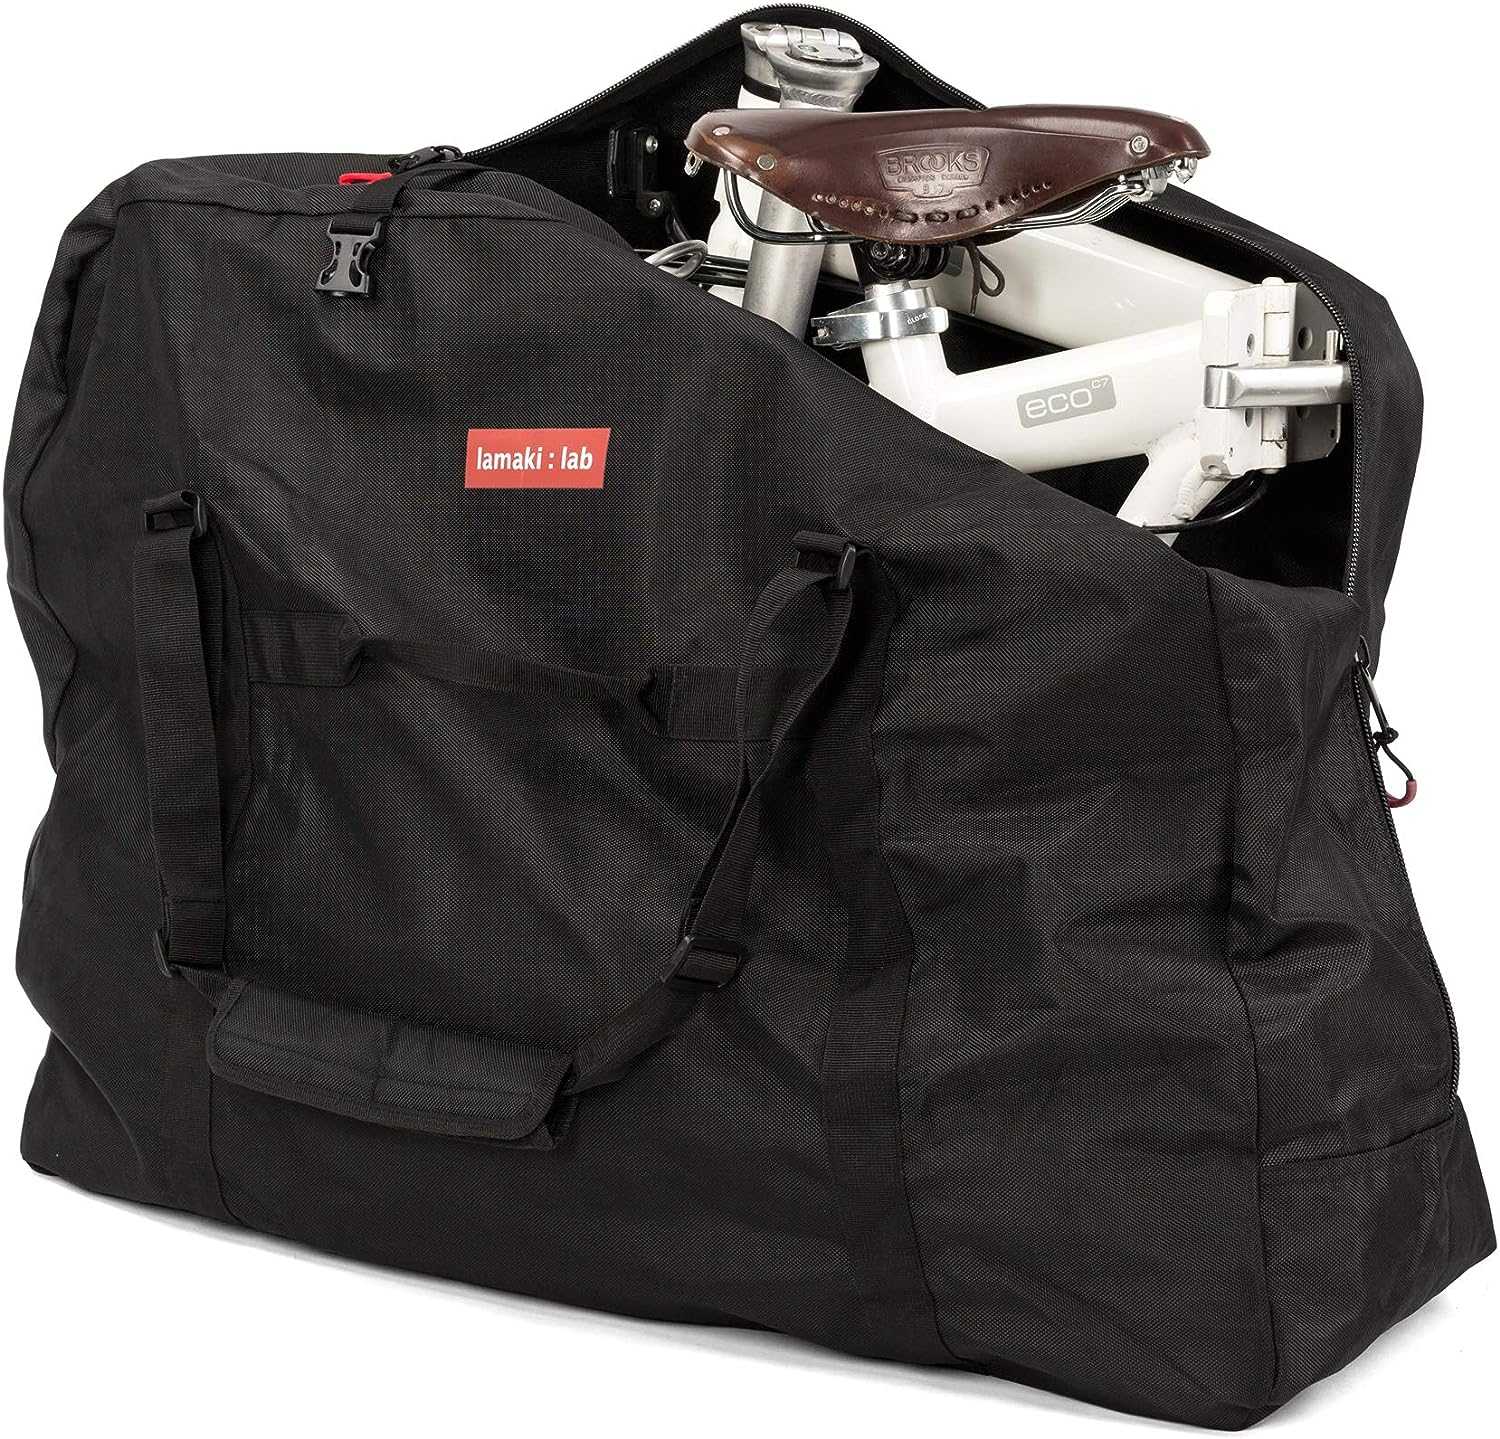 Summarizing Tips For Choosing Back-Roller Panniers For Bikes